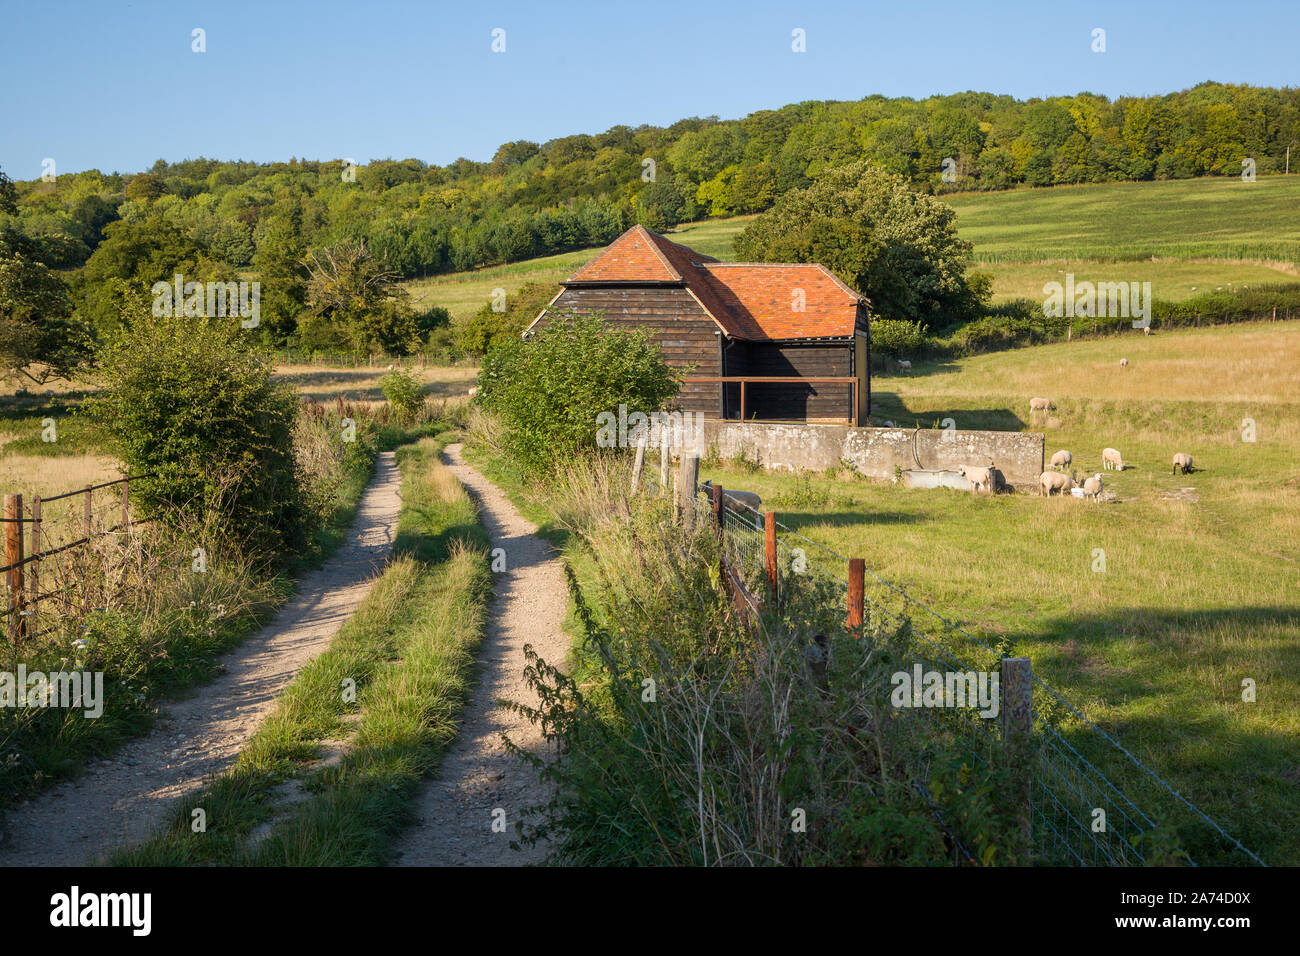 Sheep grazing by a red-tiled barn by a country lane close to the village of Hambleden, Buckinghamshire Stock Photo